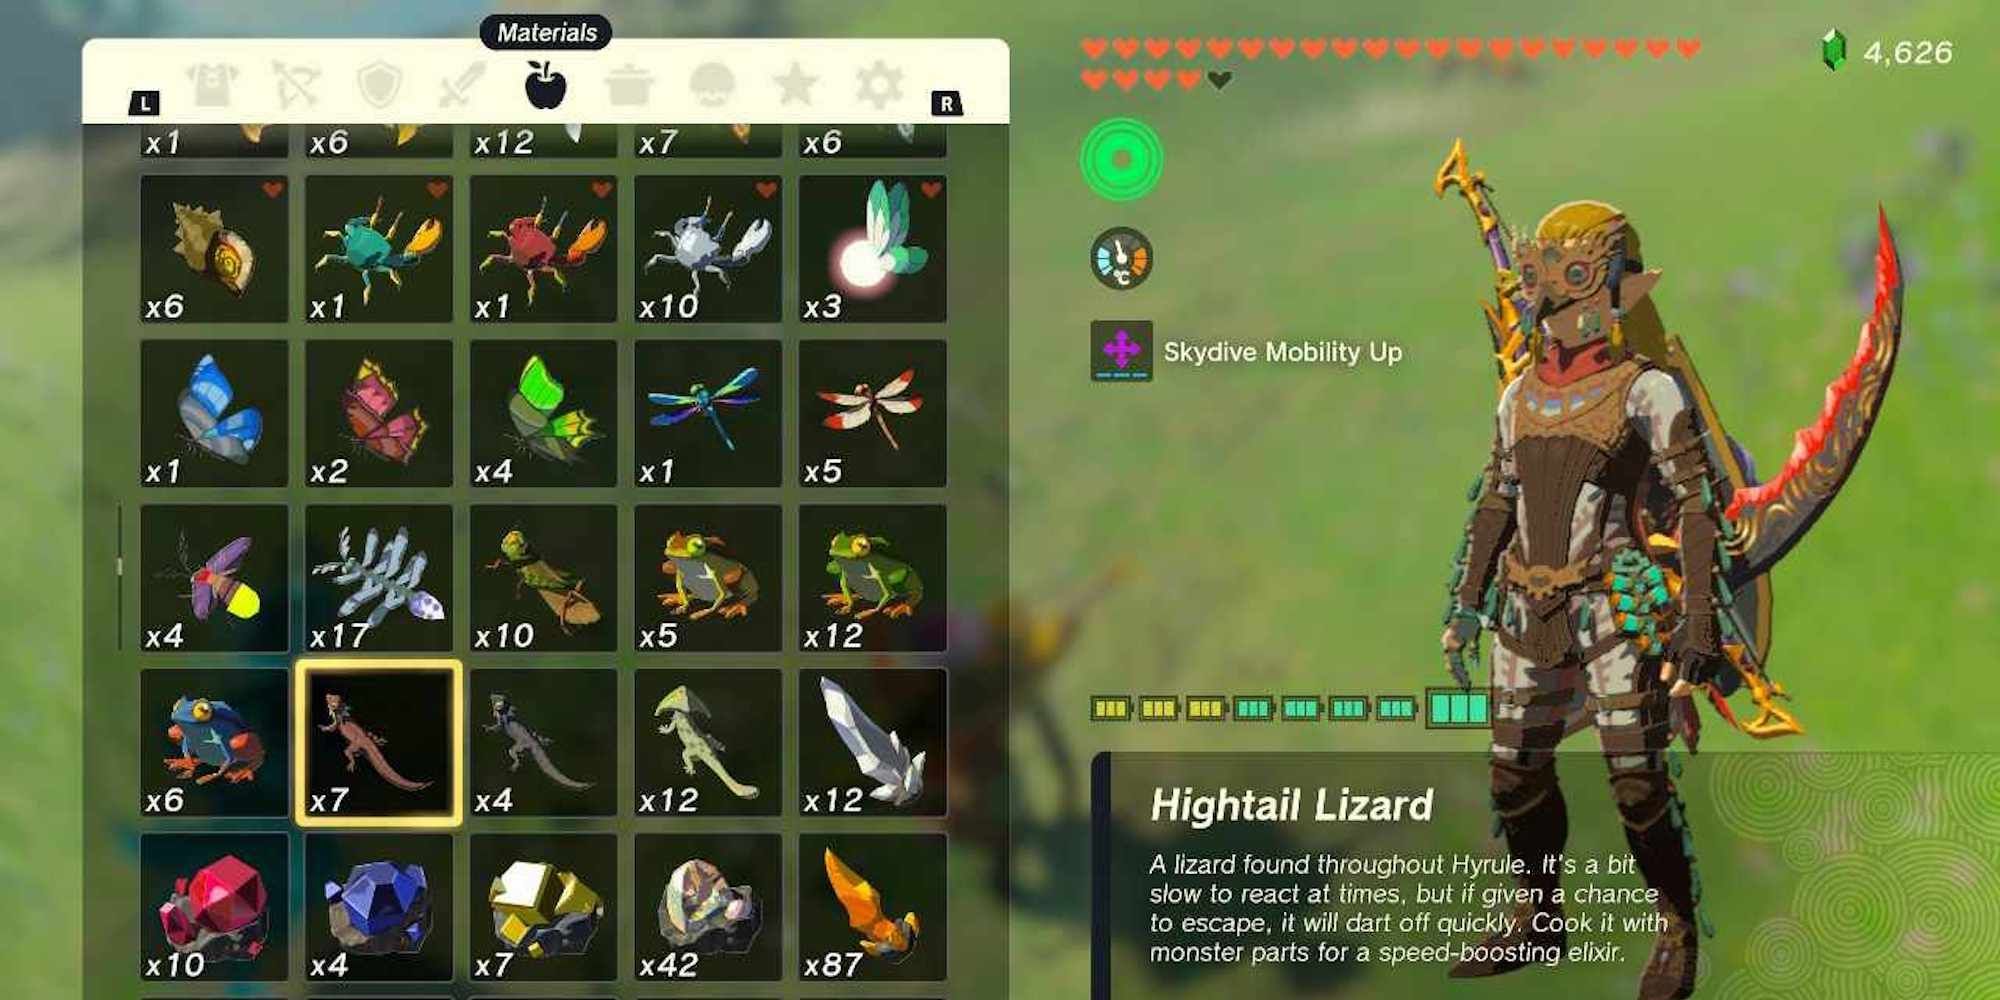 Link from Tears of the Kingdom beside his inventory, which is showing a hightail lizard.